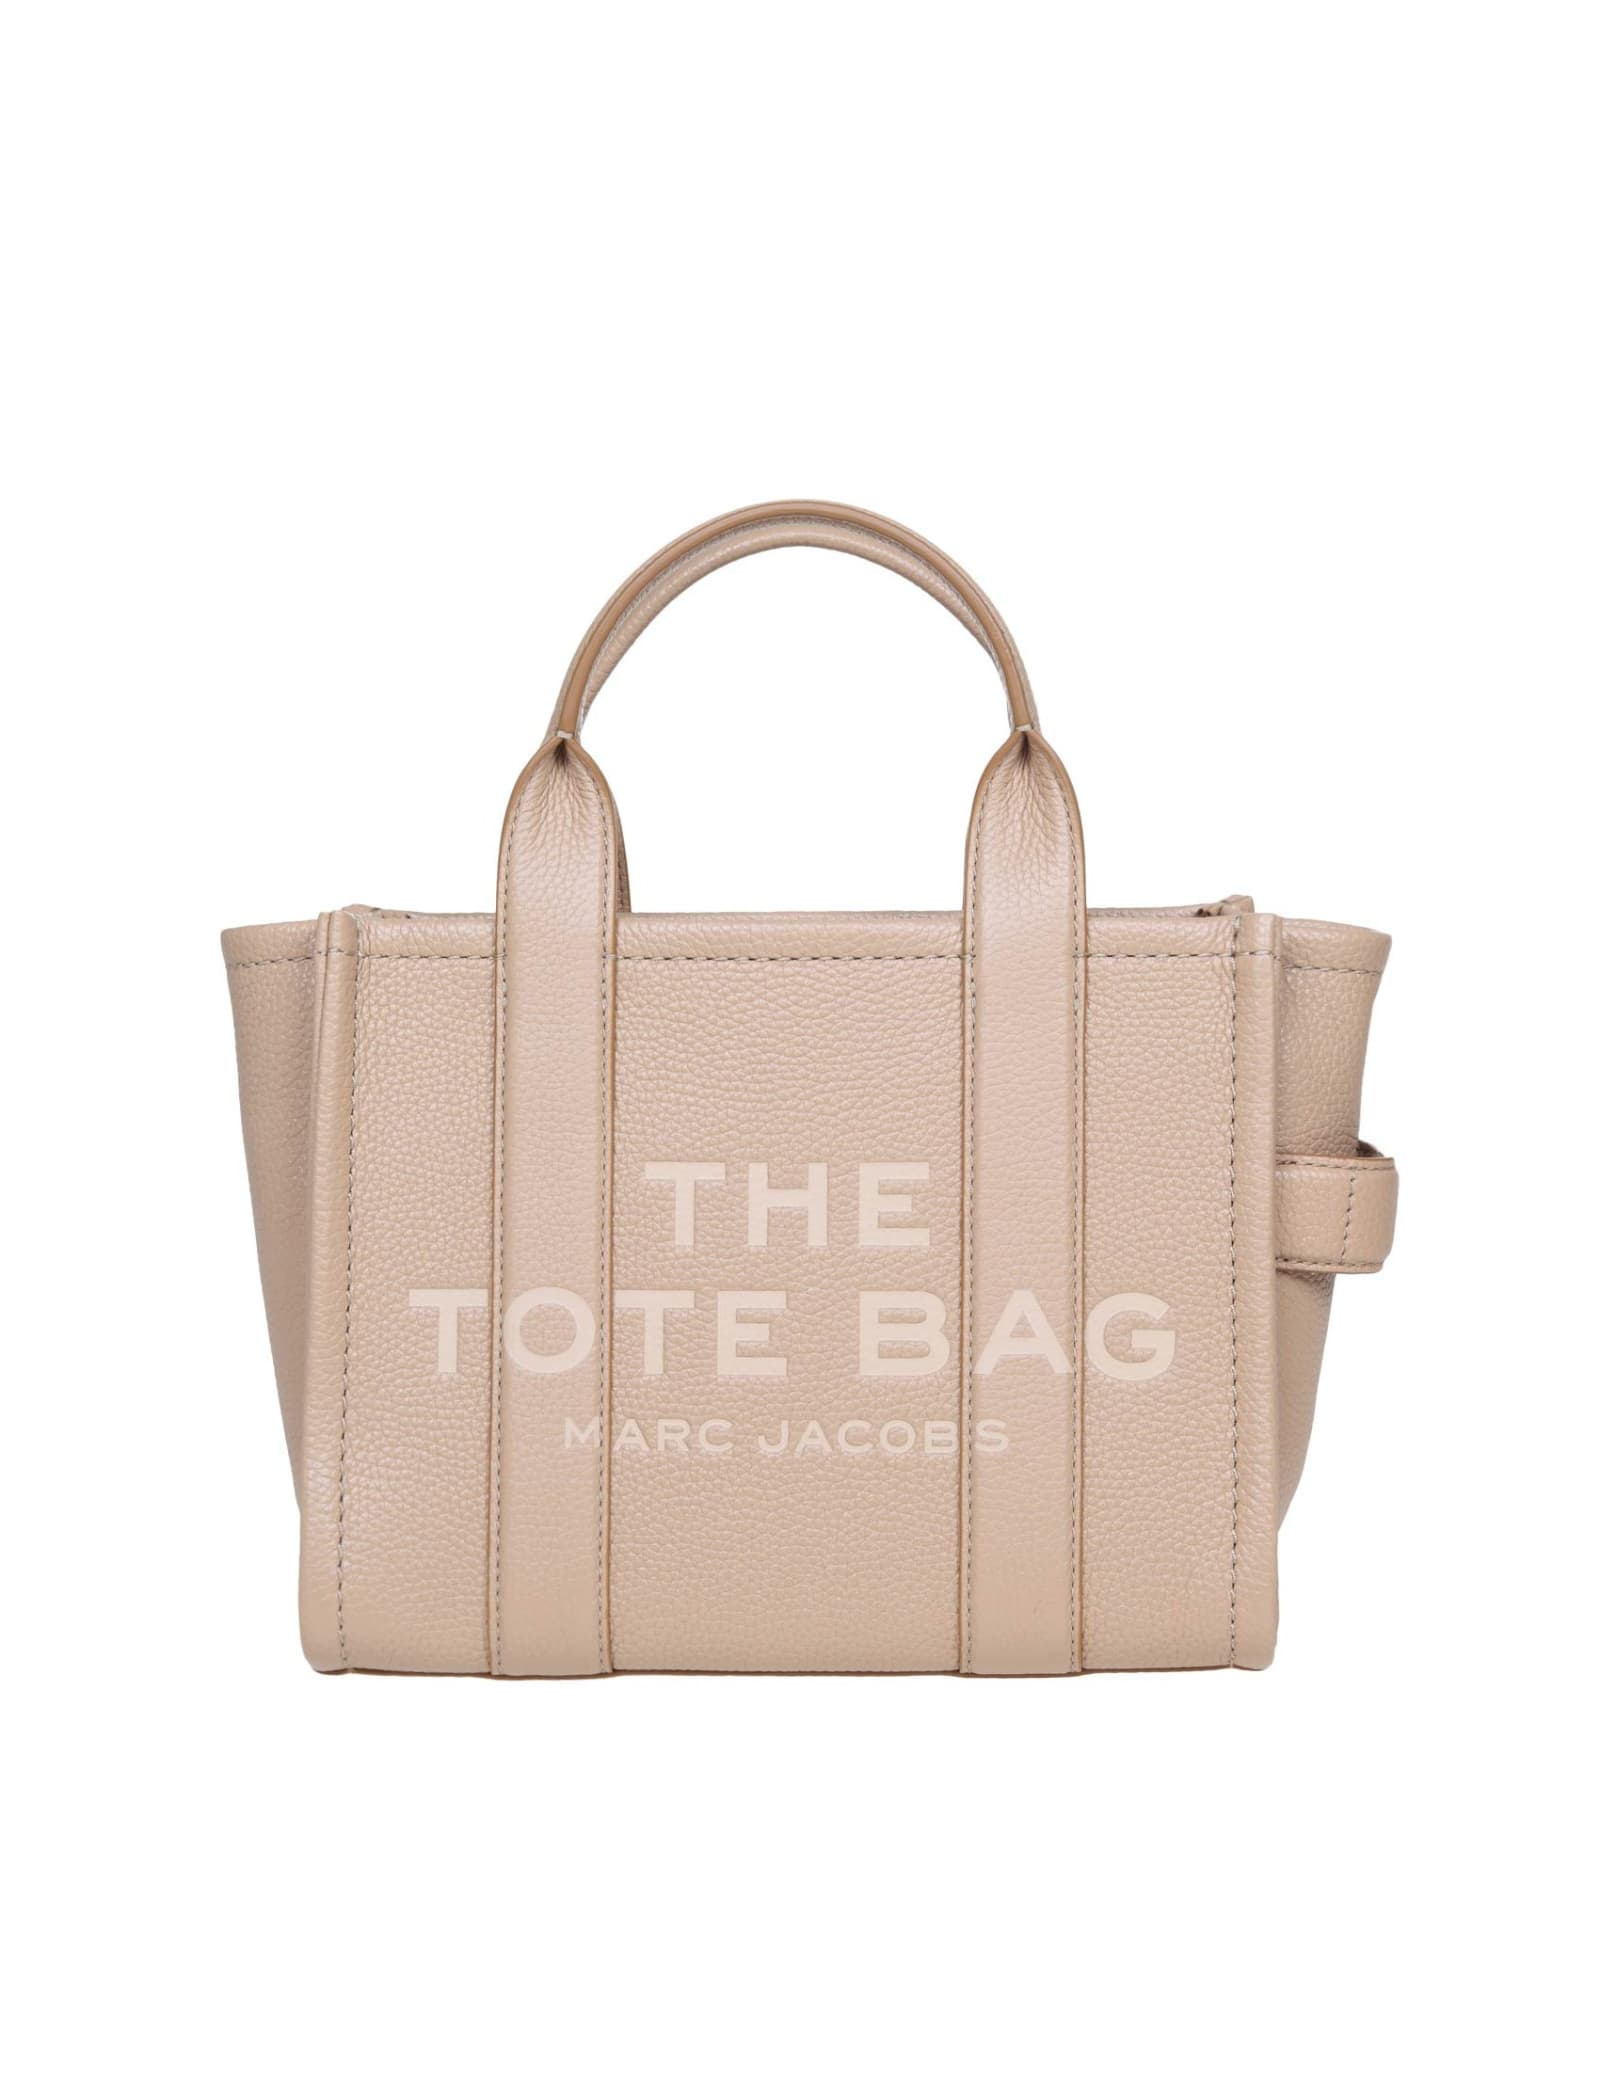 MARC JACOBS THE SMALL TOTE IN CAMEL COLOR LEATHER